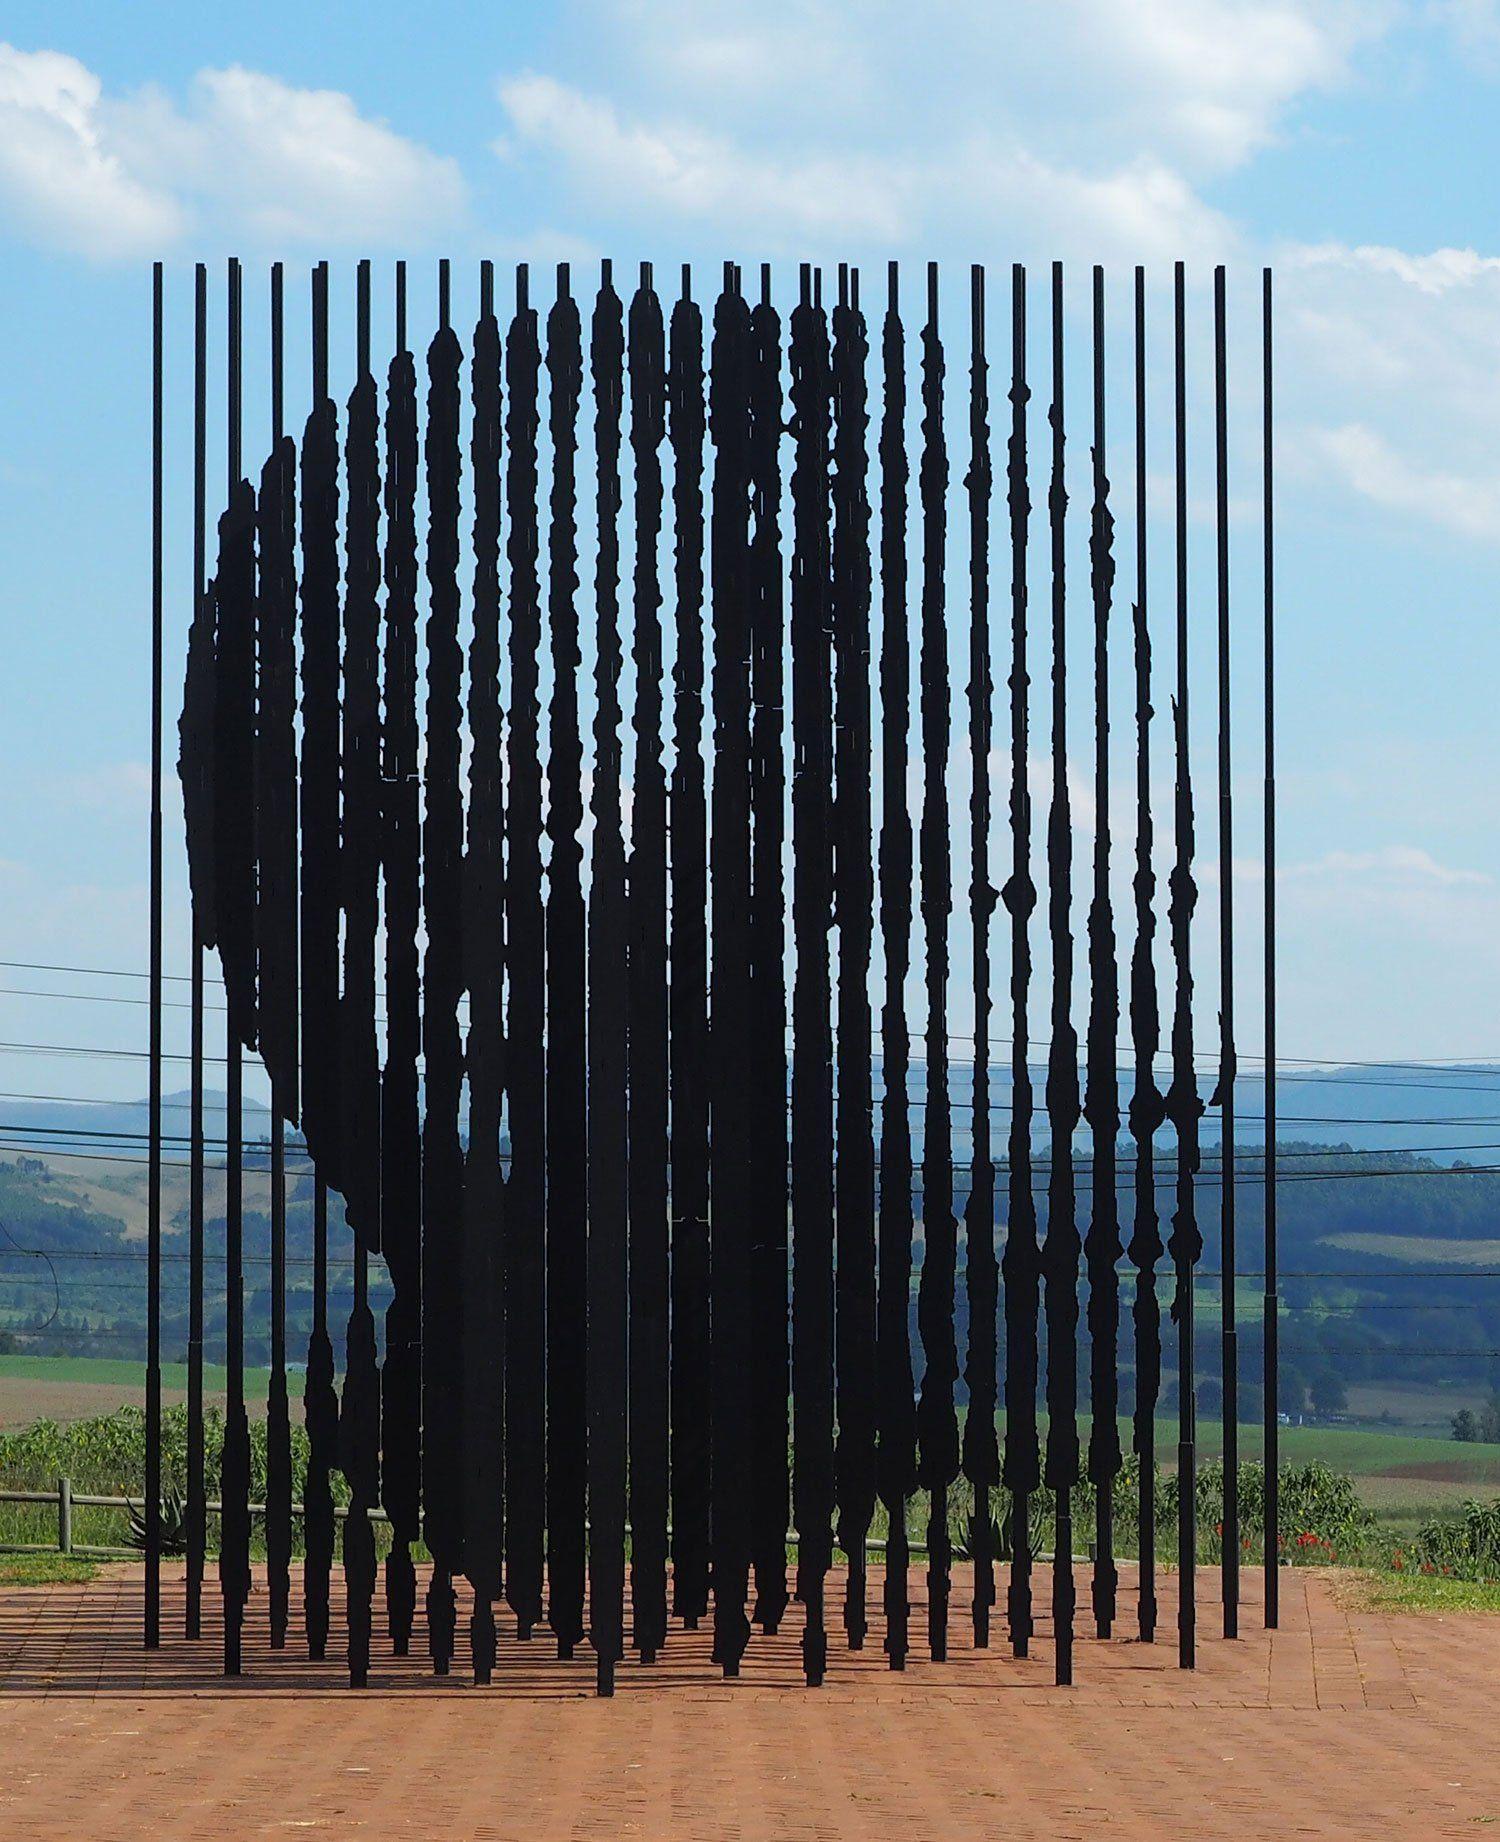 The sculpture at the Nelson Mandela Capture Site